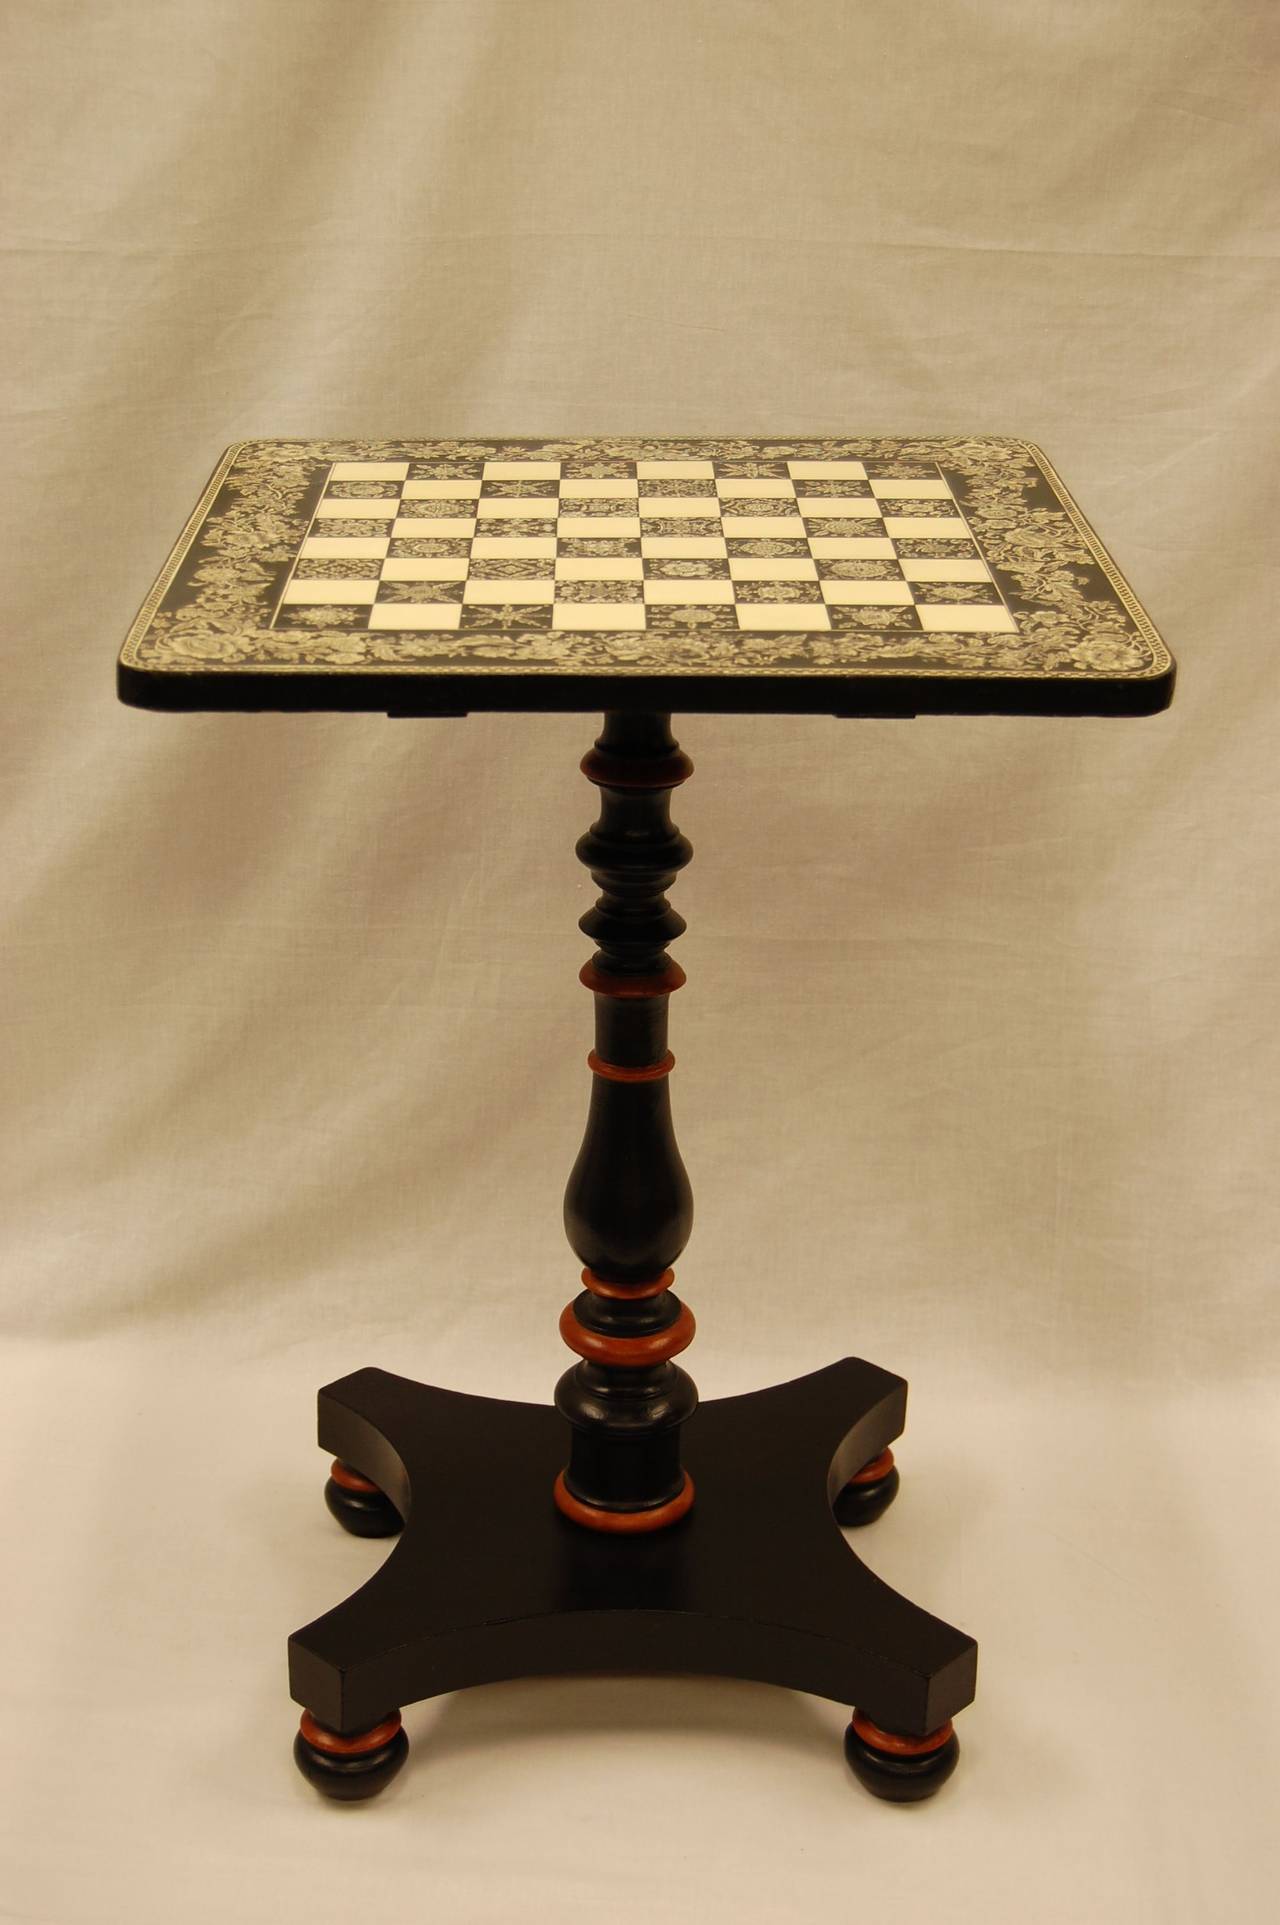 Painted 19th Century English Regency Penwork Games Table Circa 1820-1840 For Sale